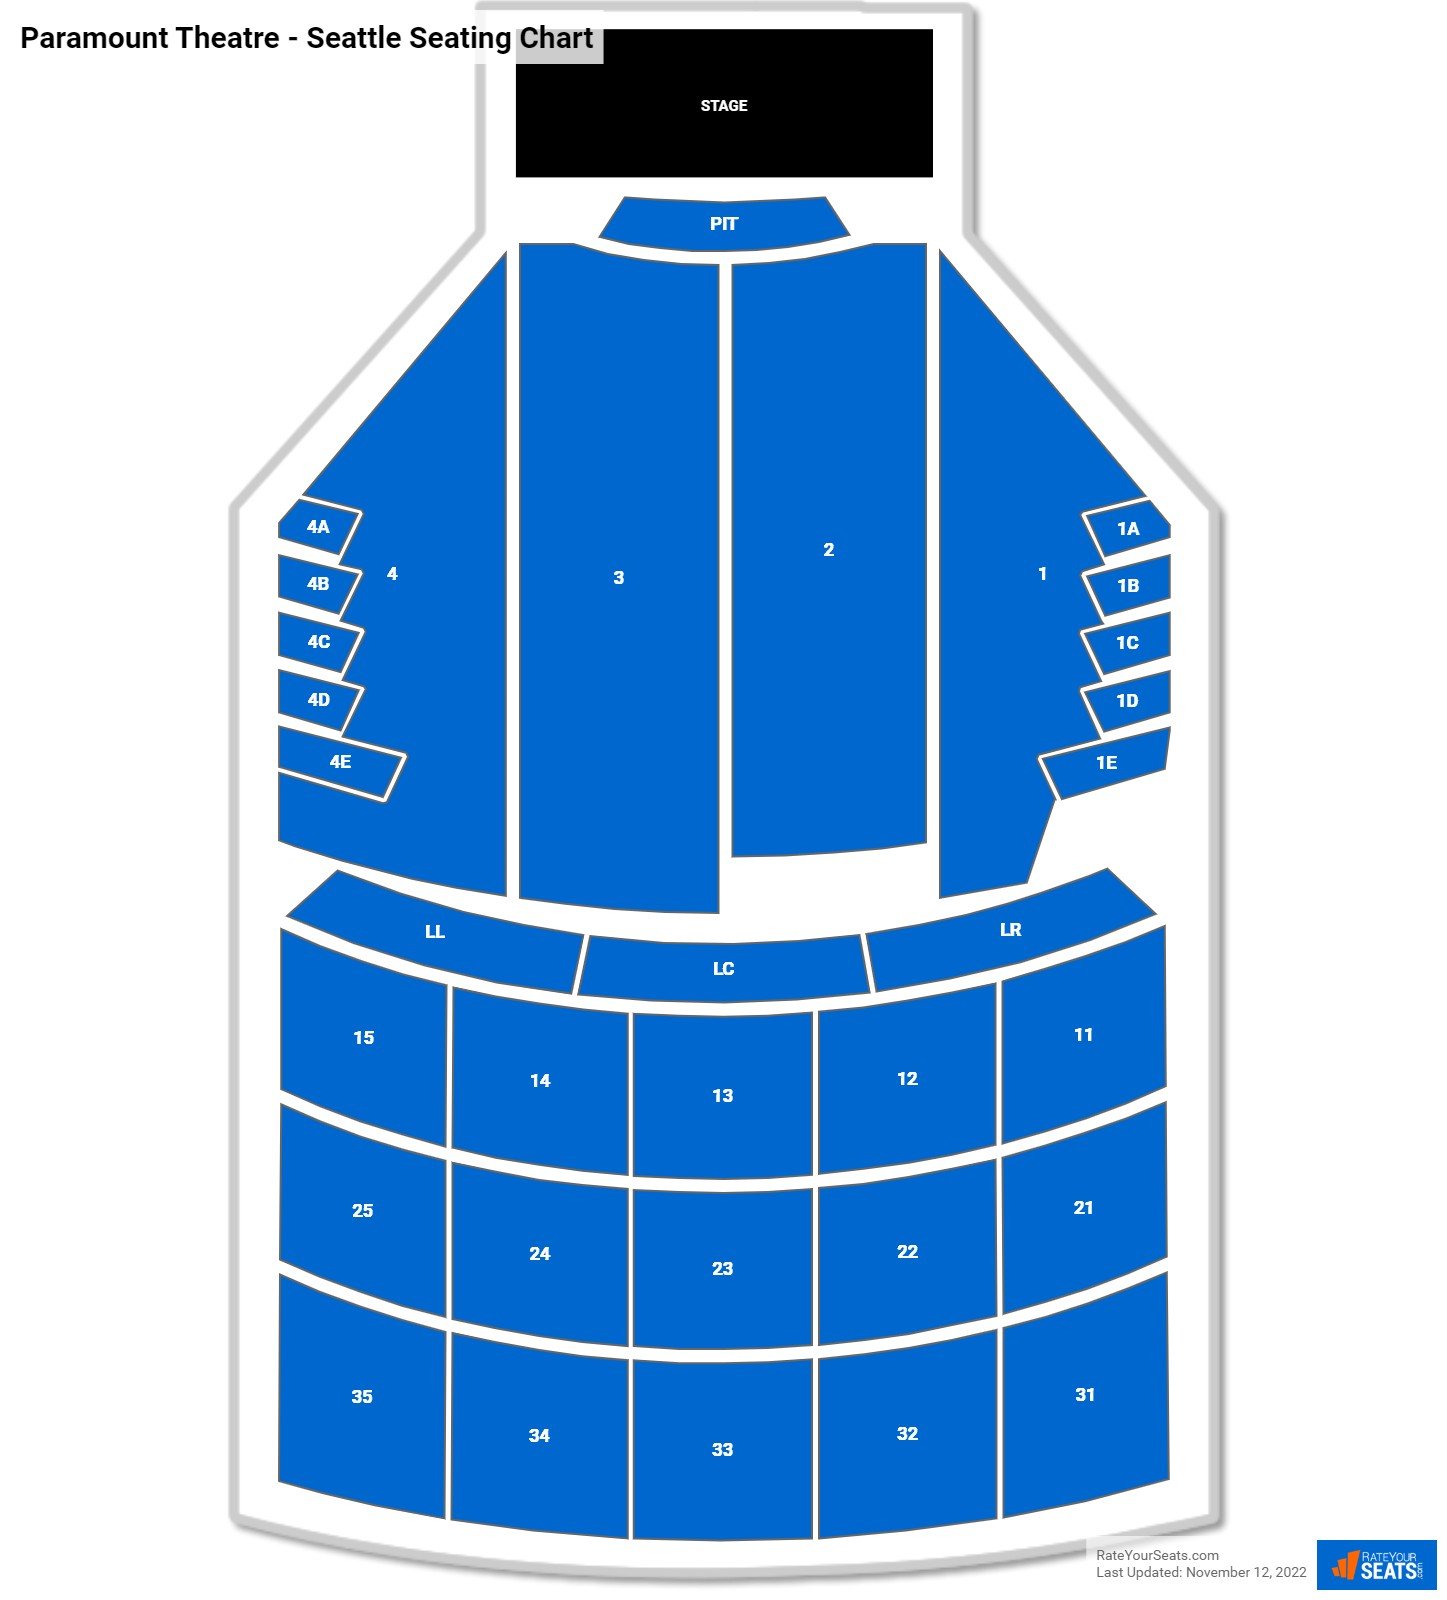 Paramount Theatre - Seattle Theater Seating Chart